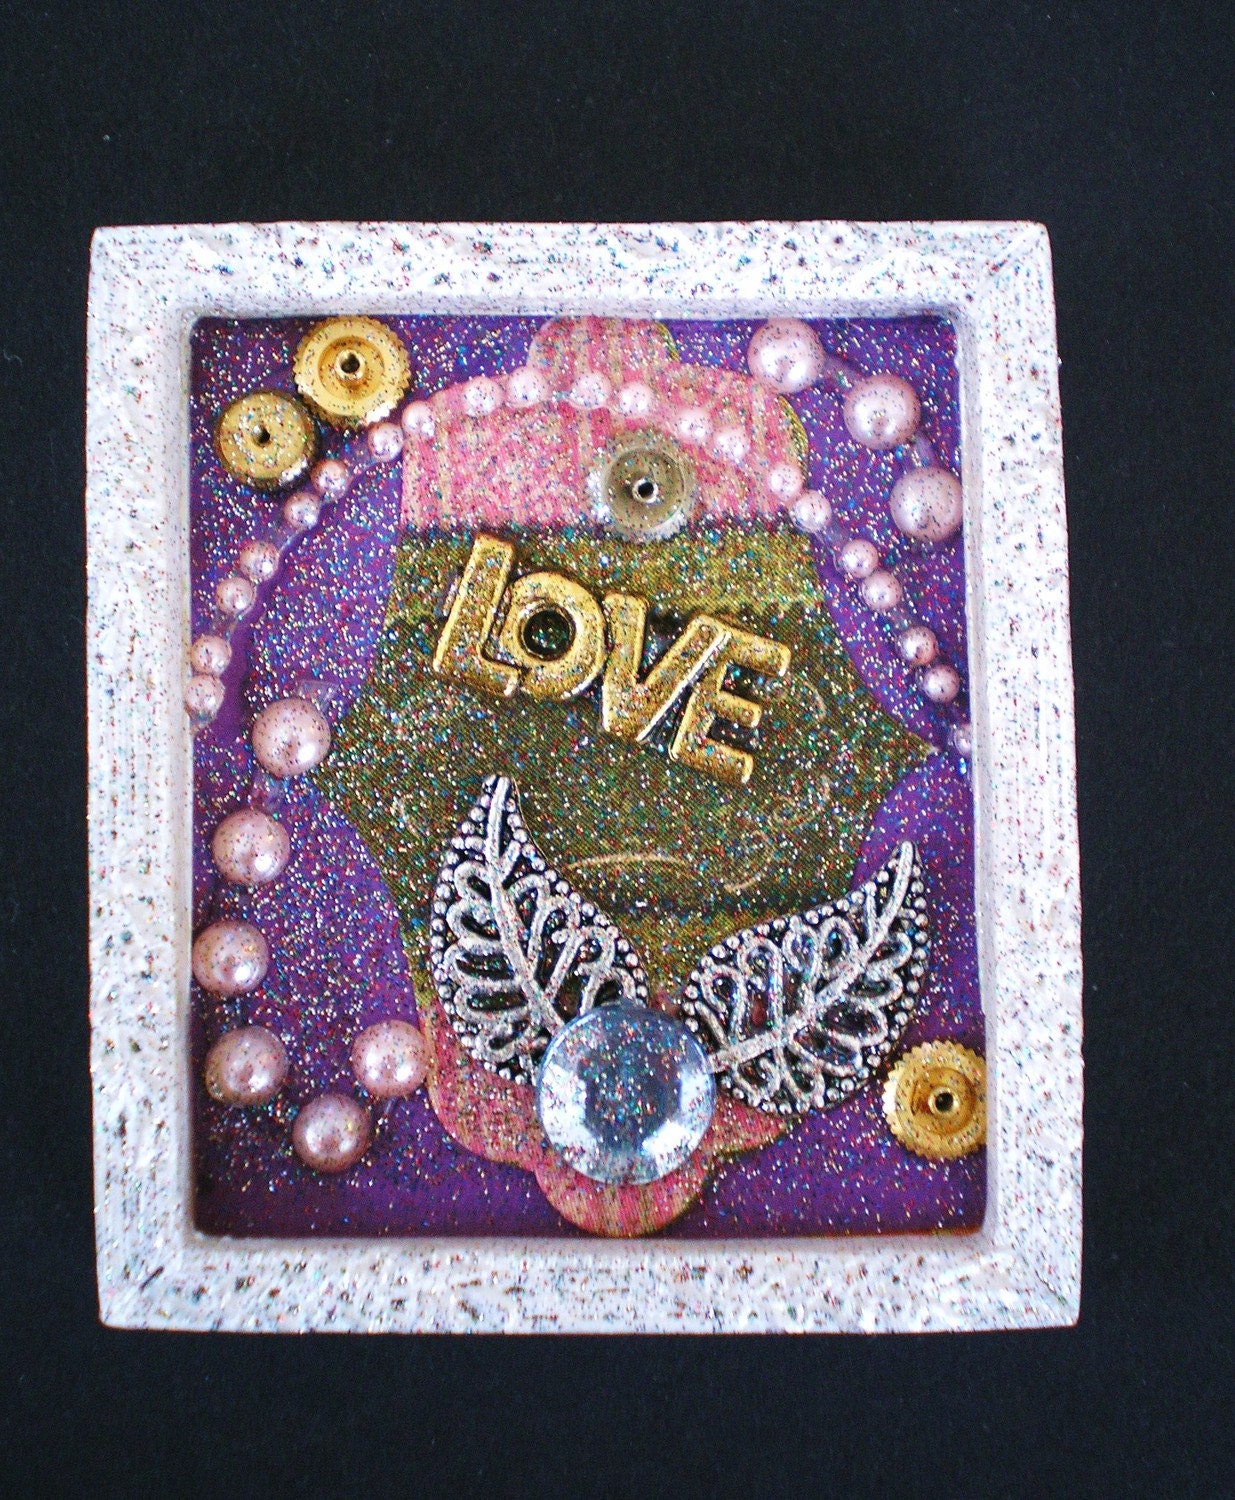 It's Only Love  - Tiny Collage Mixed Media OOAK Framed Signed with Beads Paper Watch Parts